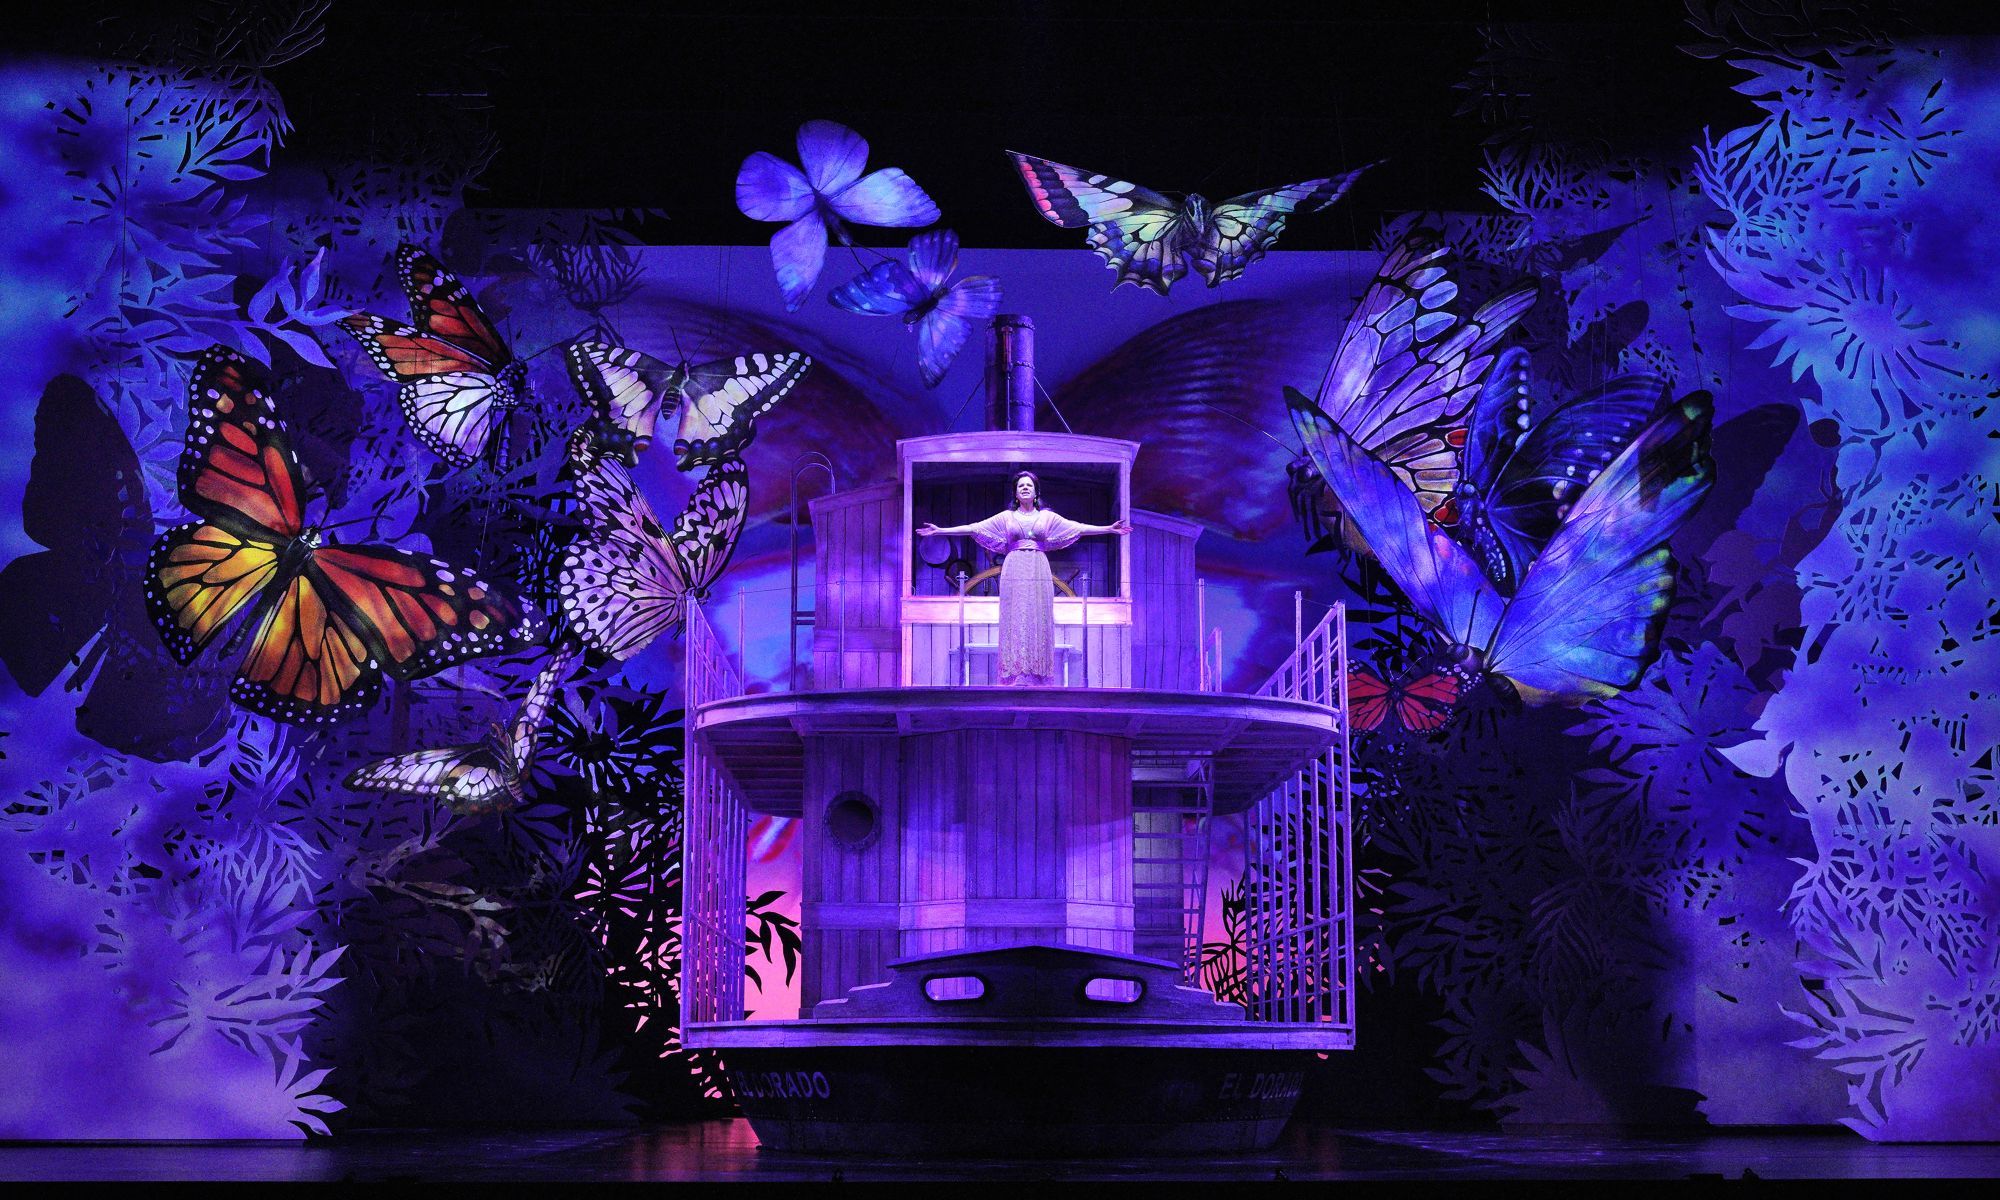 An image from the opera Florencia en el Amazonas: A woman stands with open arms at the front of a ship. She is surrounded by giant butterflies and illuminated in a purple light. 